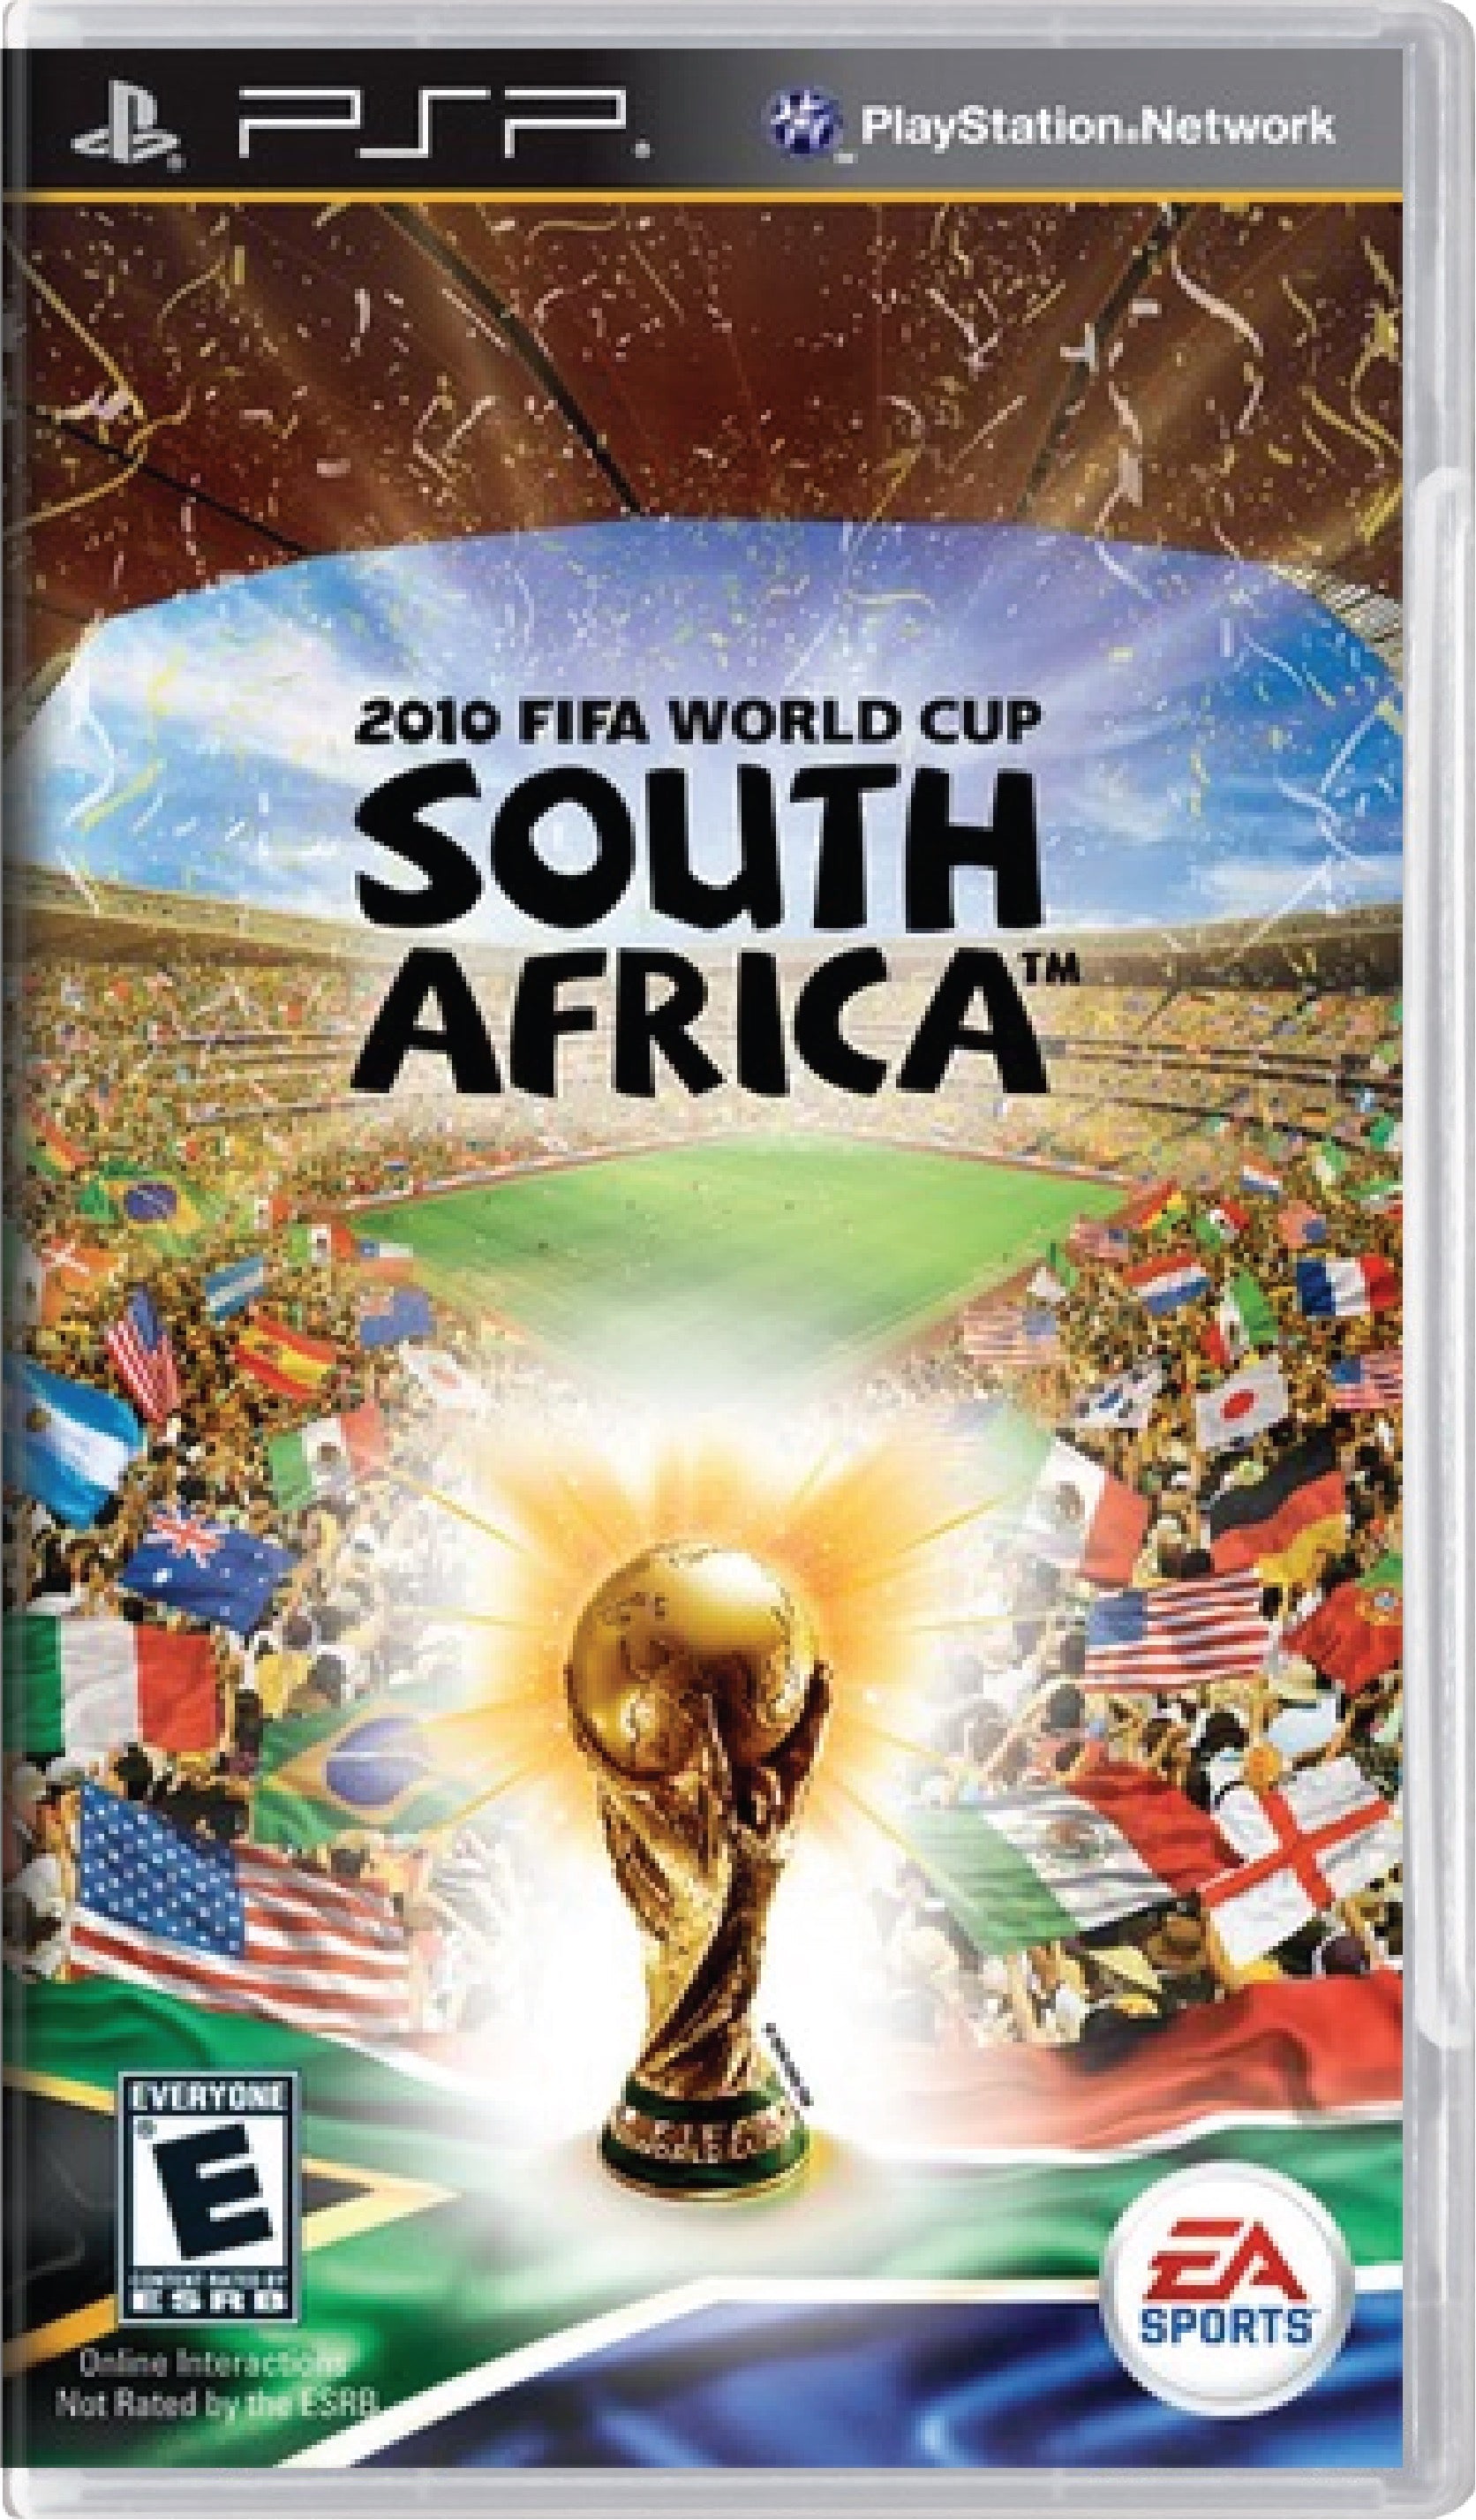 2010 FIFA World Cup South Africa Cover Art